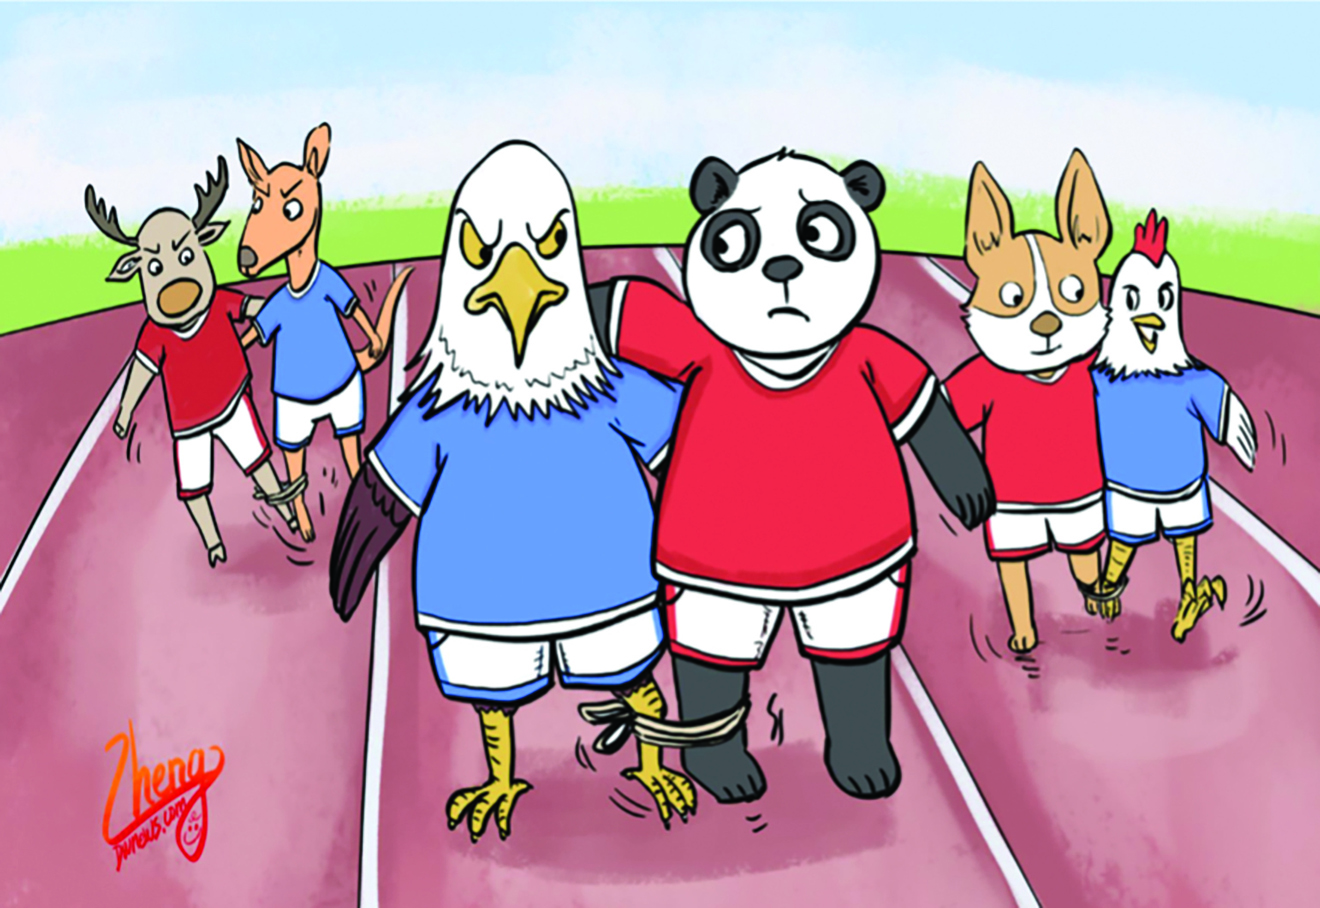 A panda and an eagle at a track field forced to run together in a race.